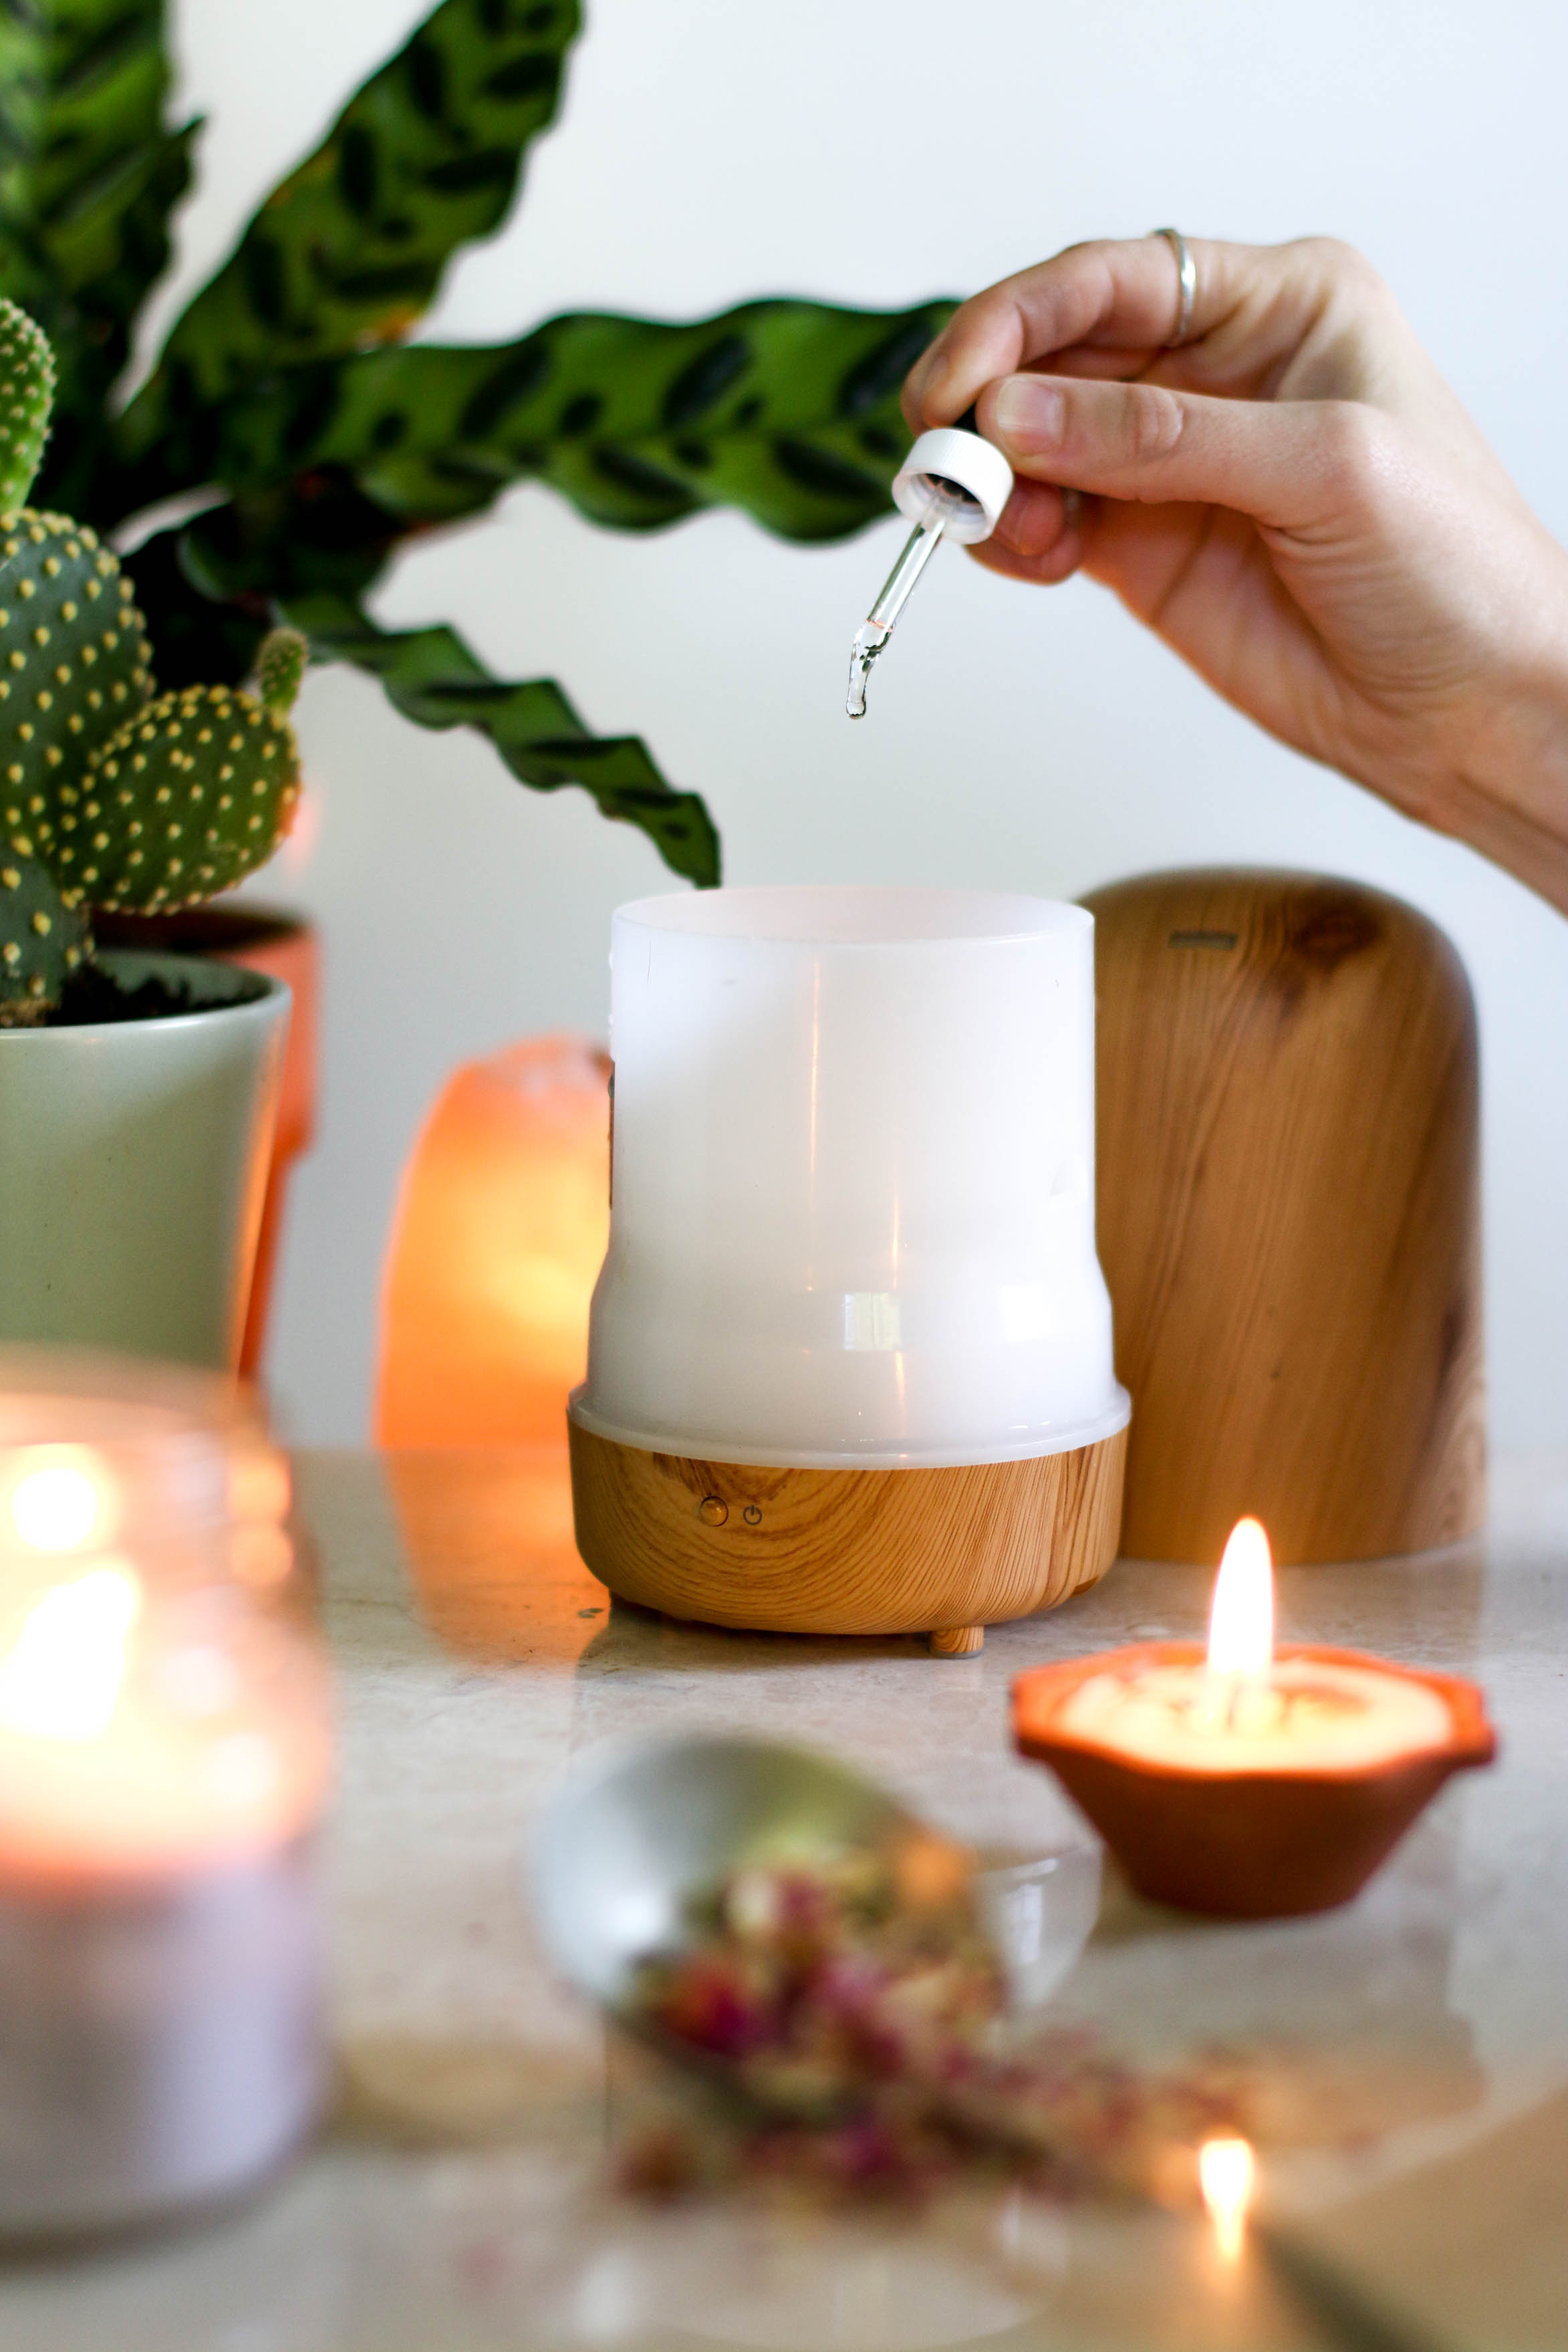 Hand-dropping-oil-into-essential-oil-diffuser-with-candles-and-plants